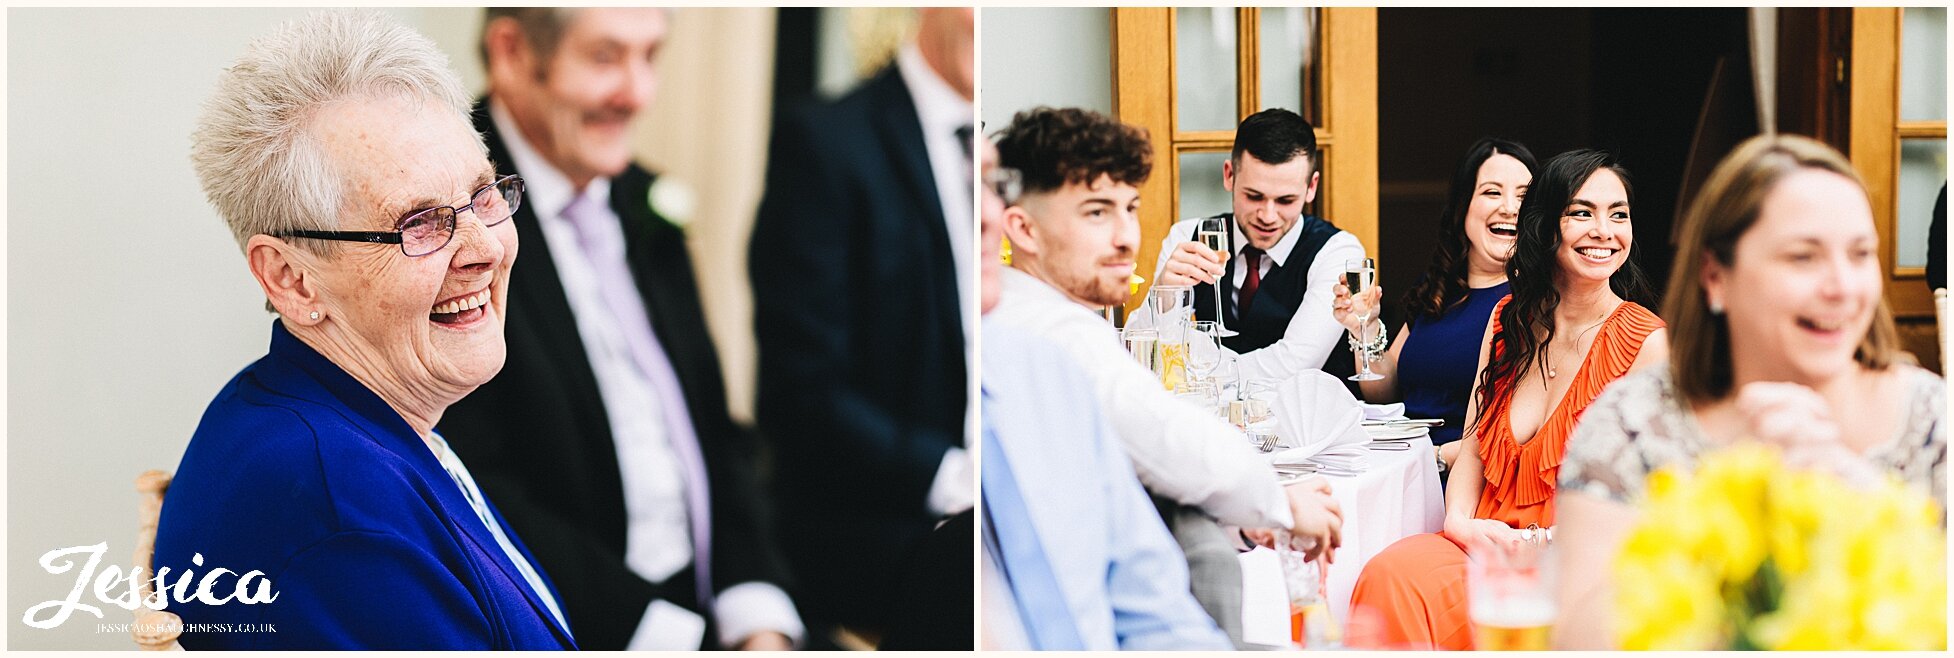 wedding guests laugh during the grooms speech